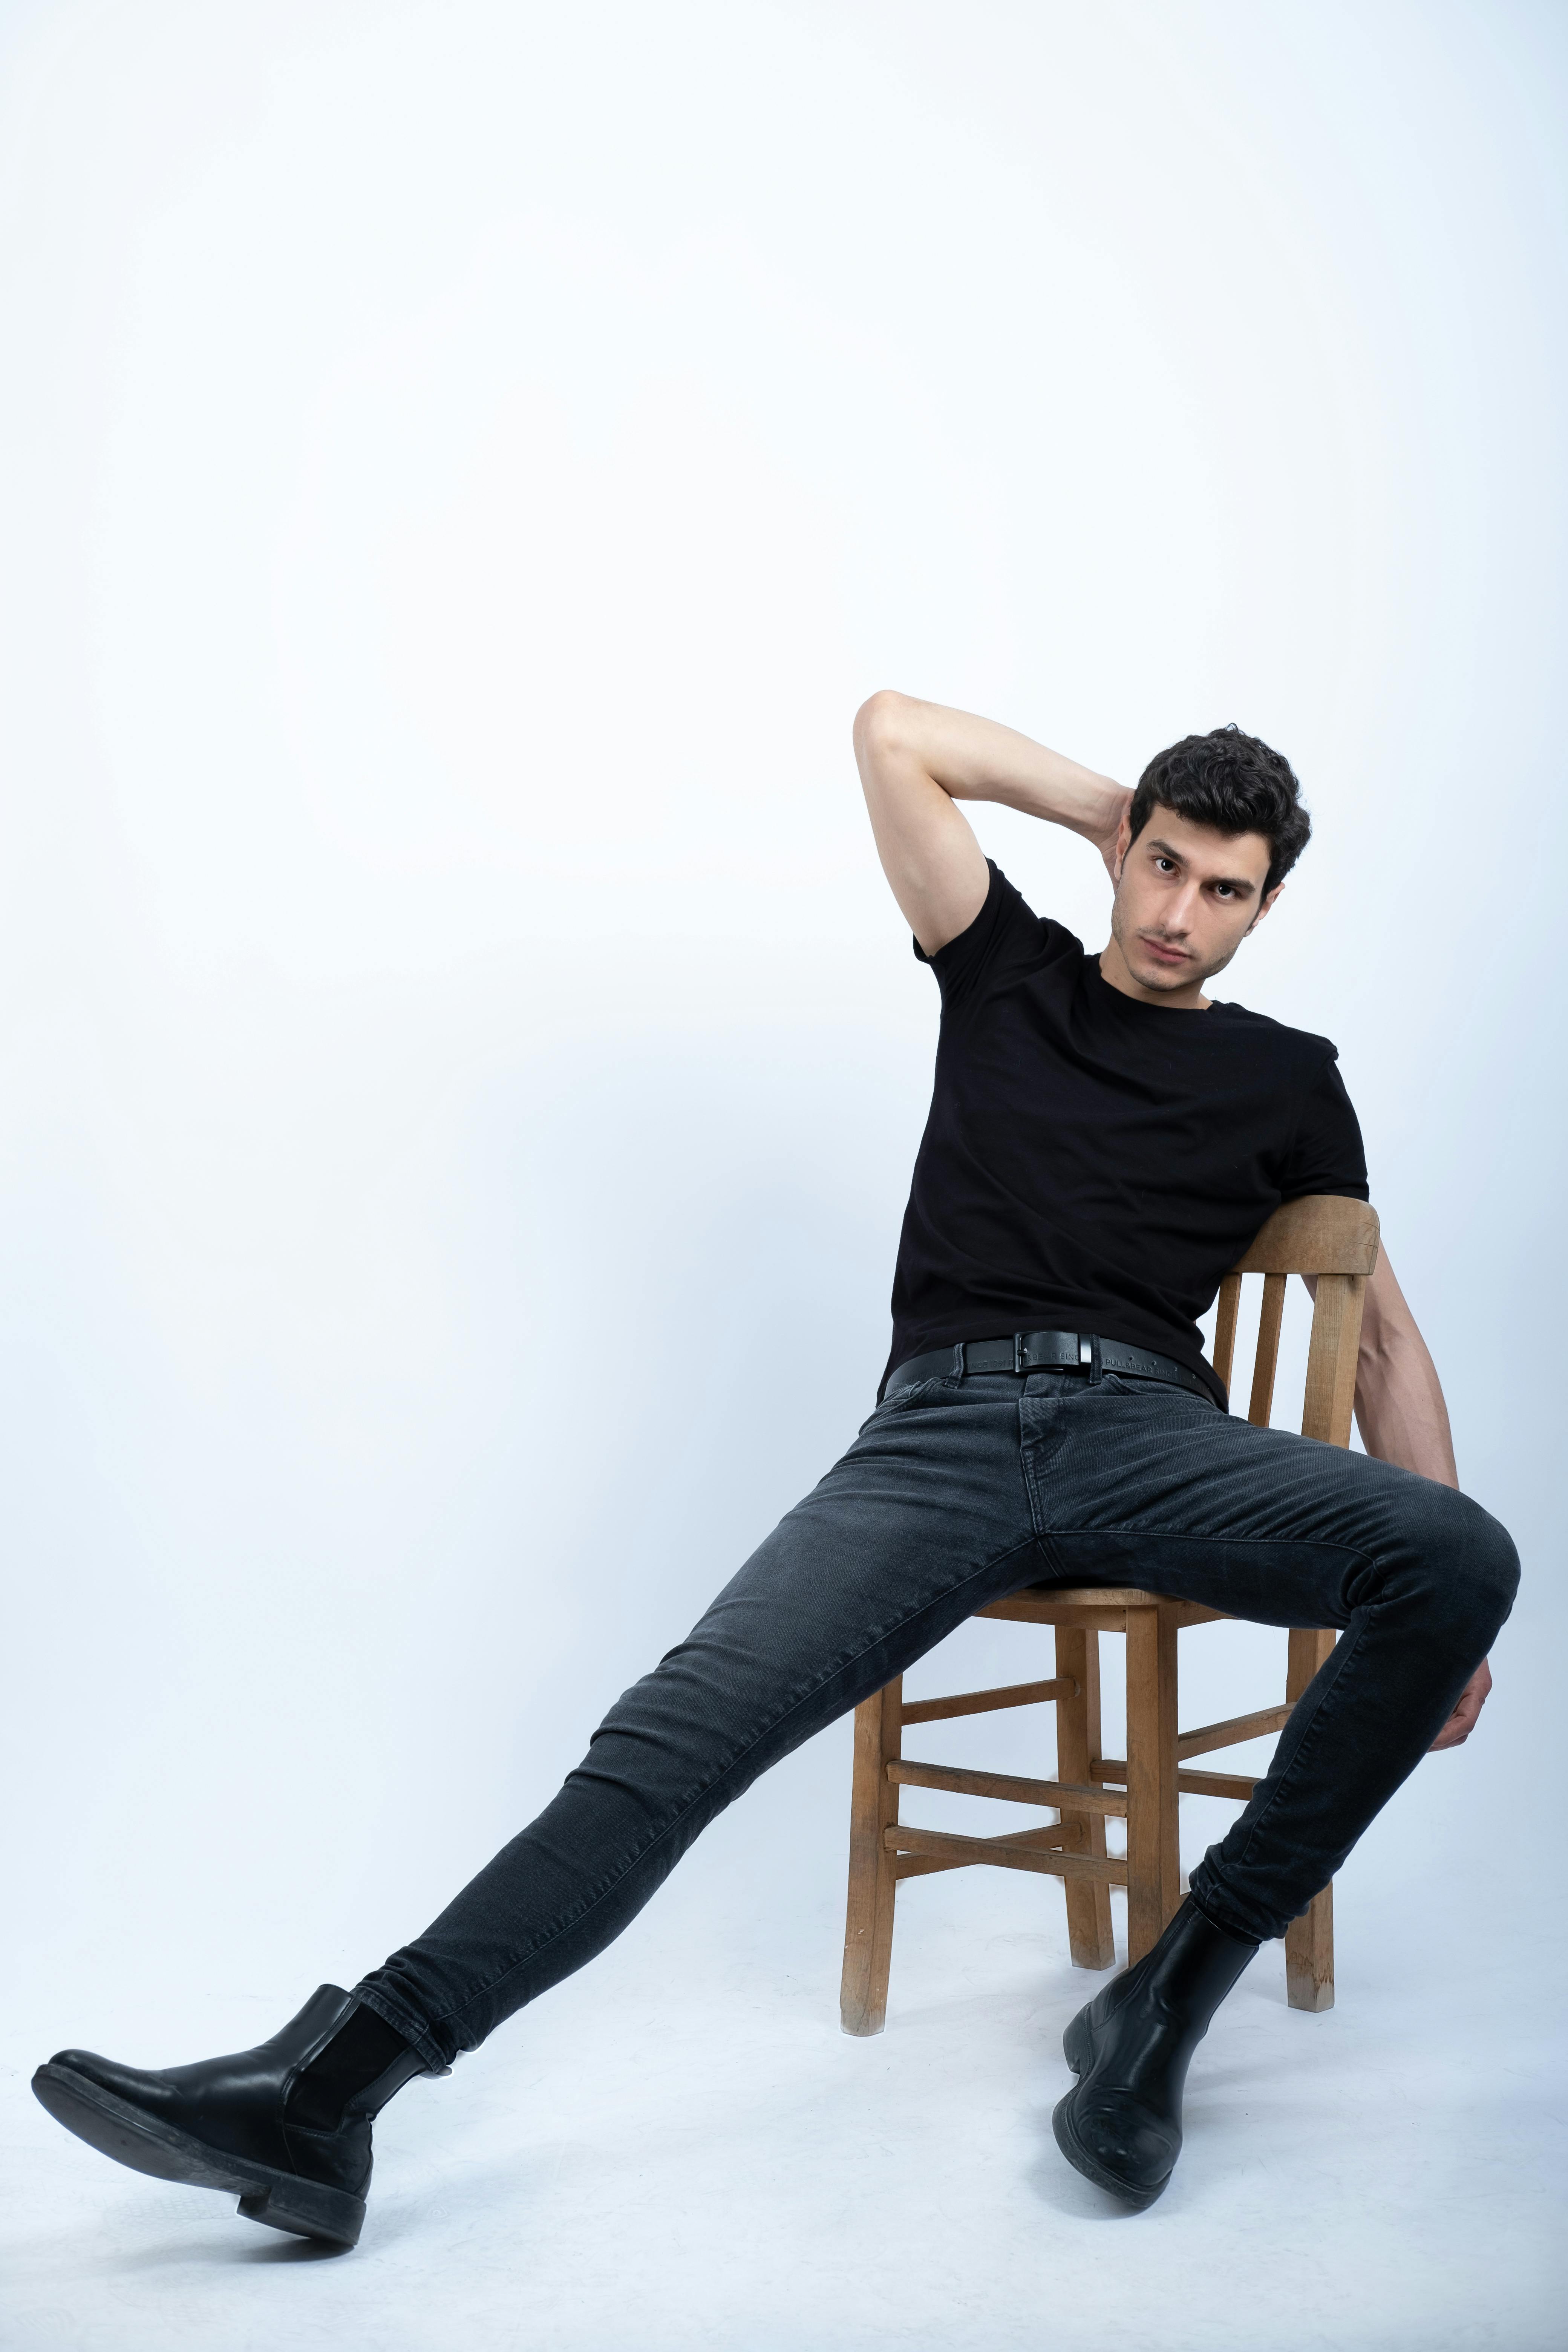 free photo of young man in a black outfit posing in studio